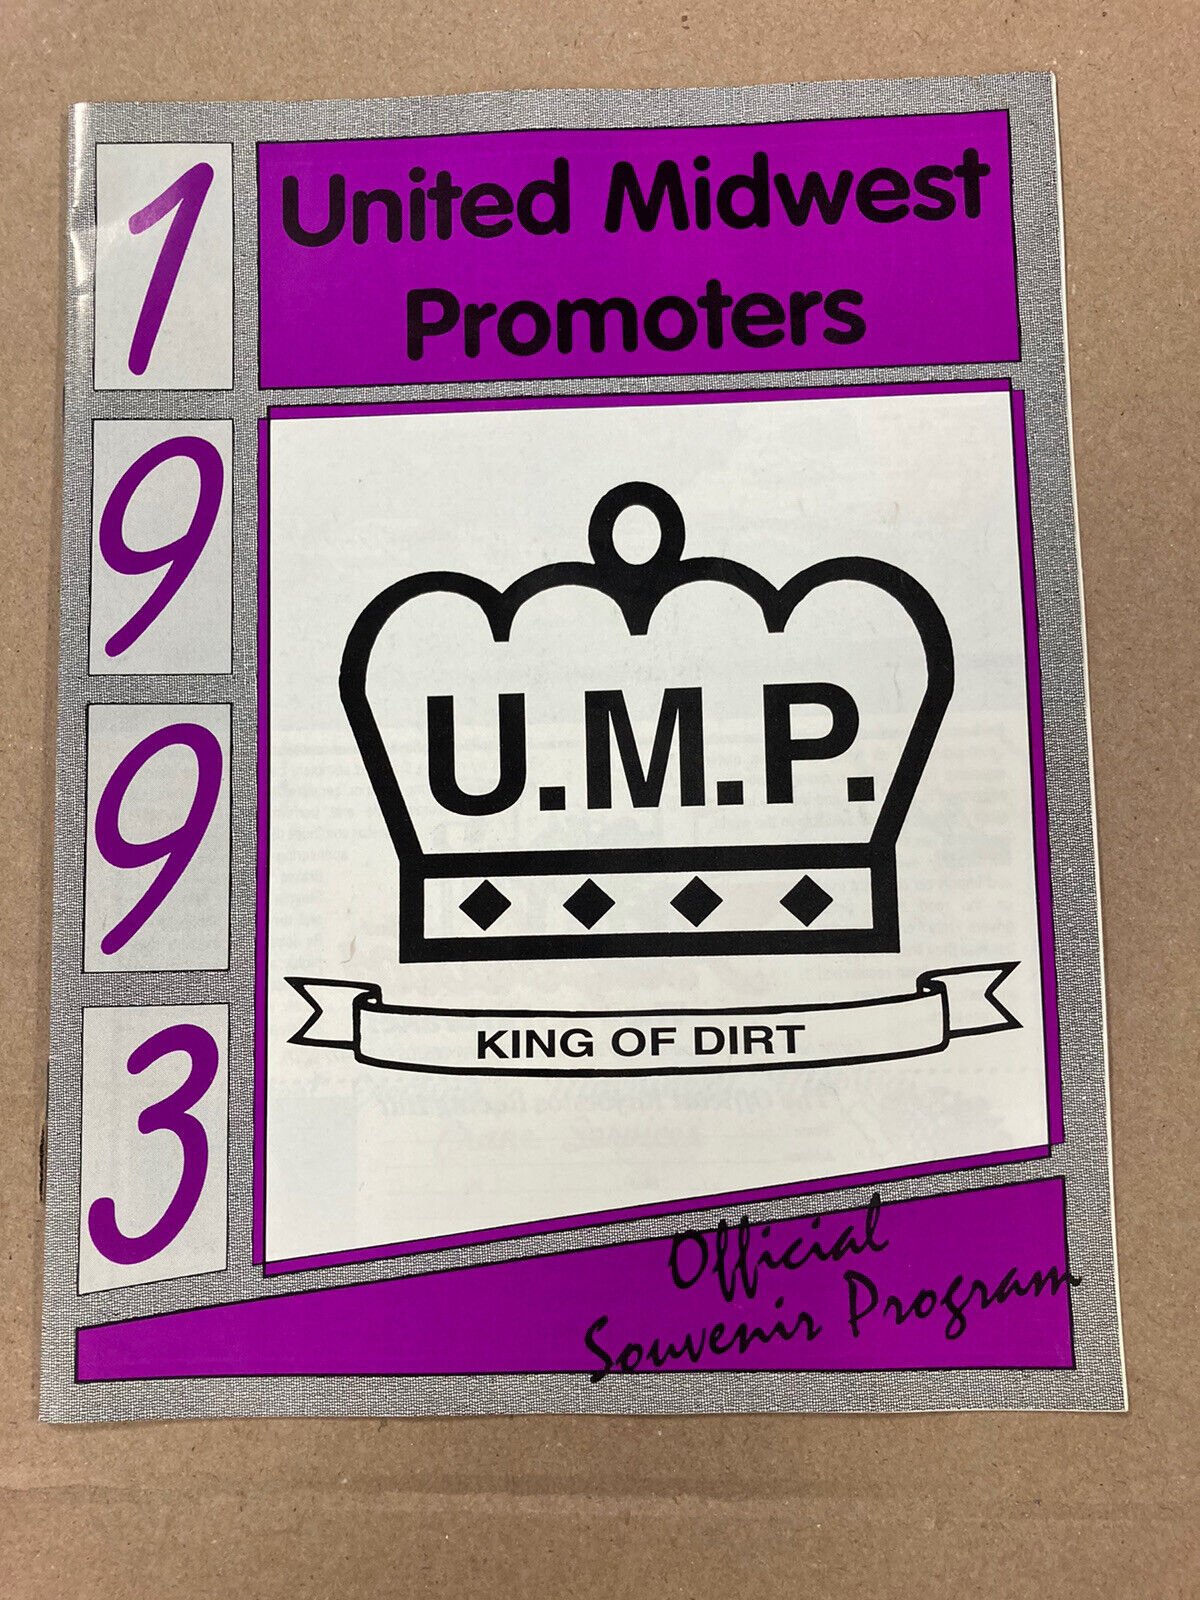 1993 Ump United Midwest Promoters Racing Program Late Model - Modified